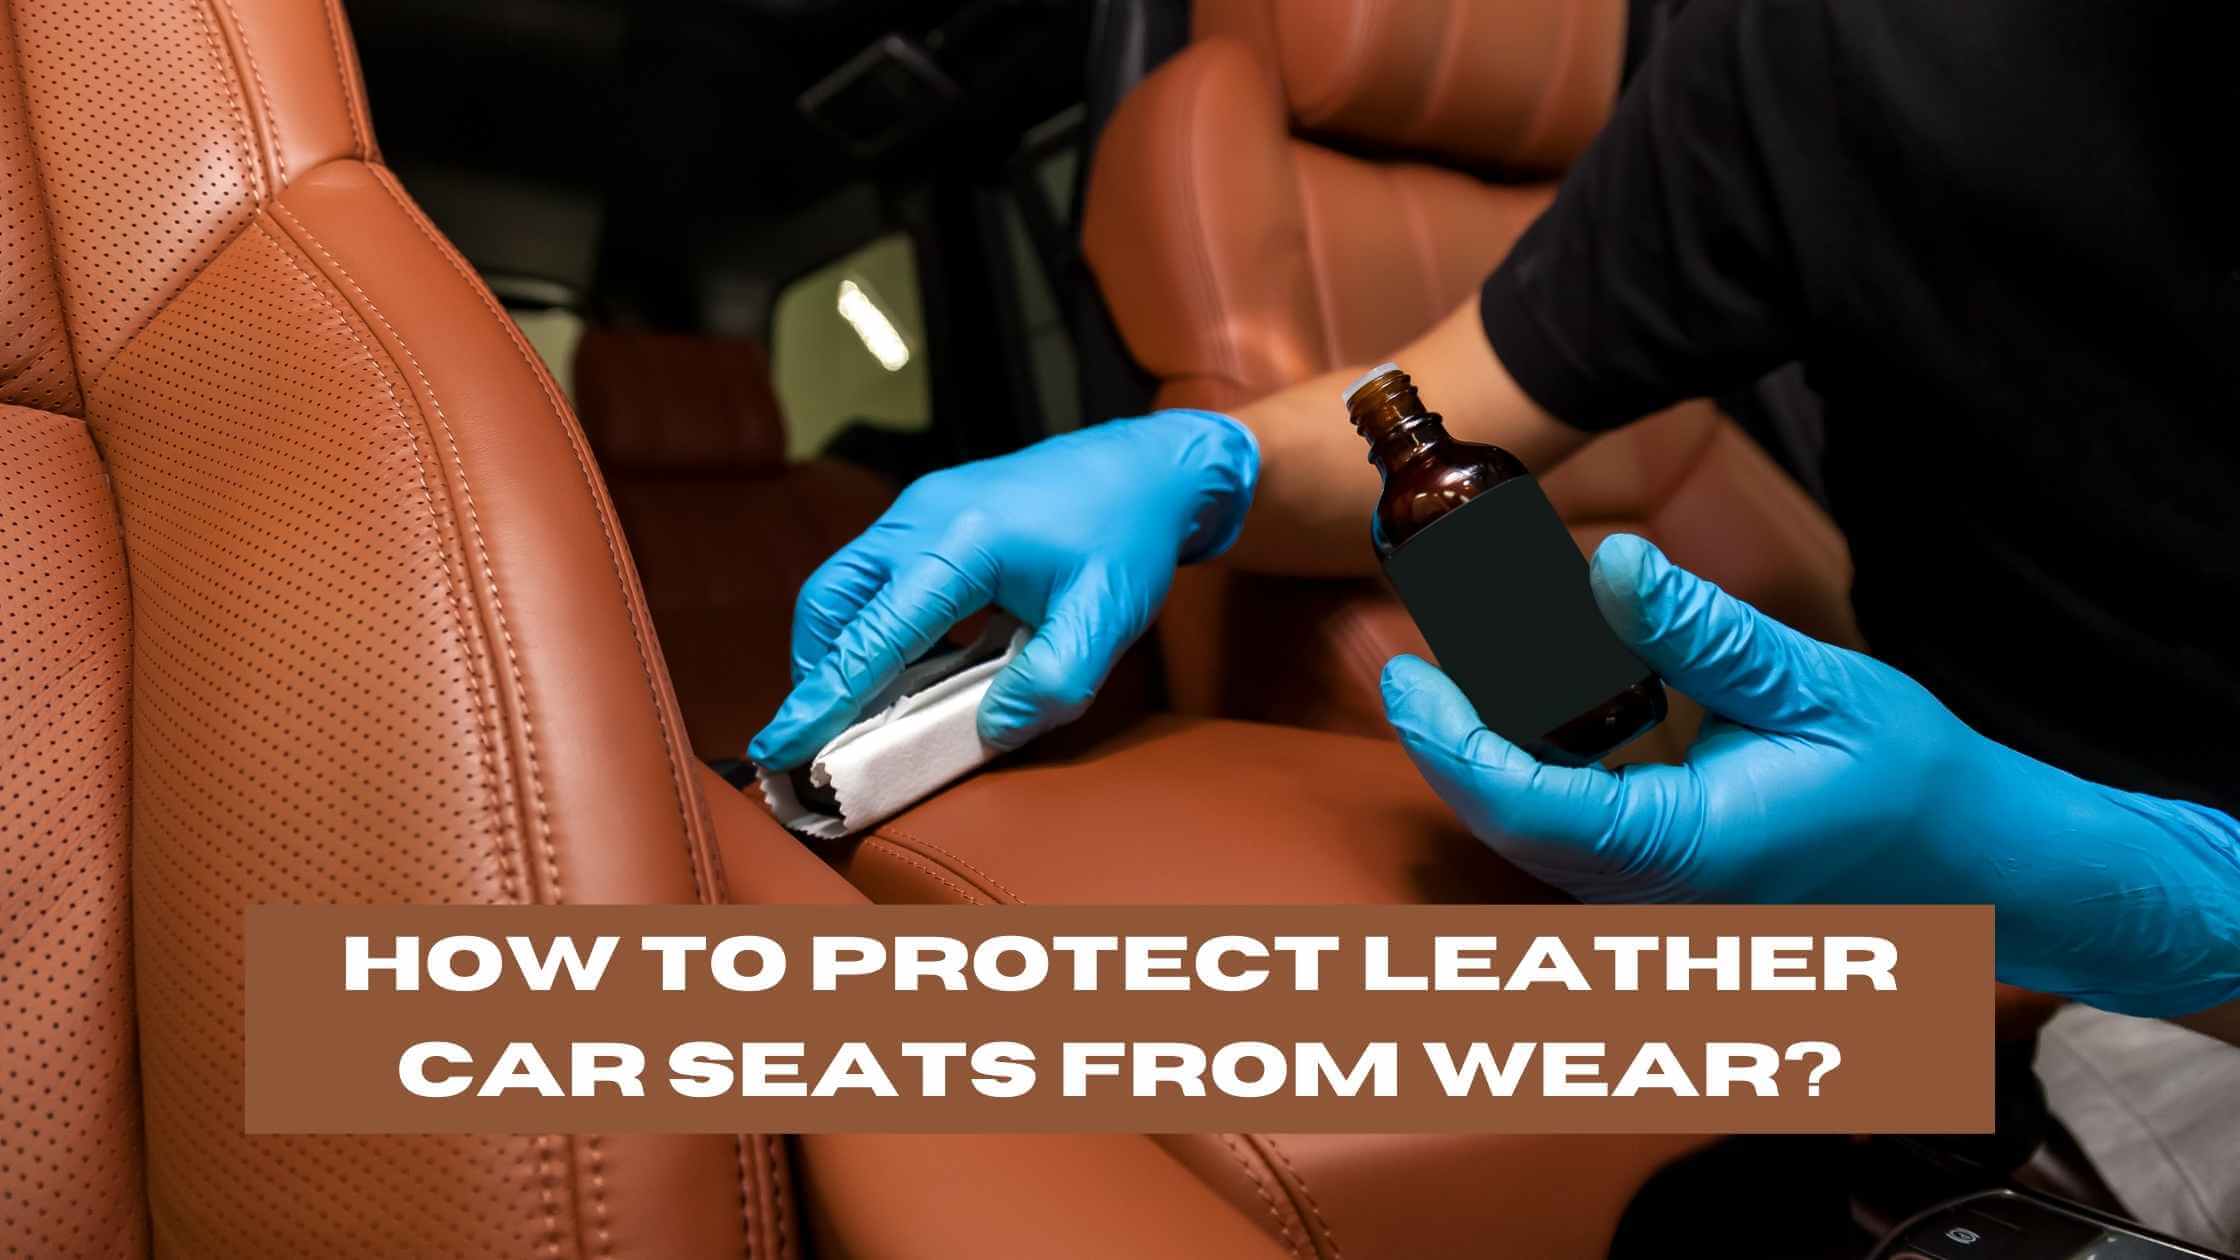 How to Protect Leather Car Seats from Wear